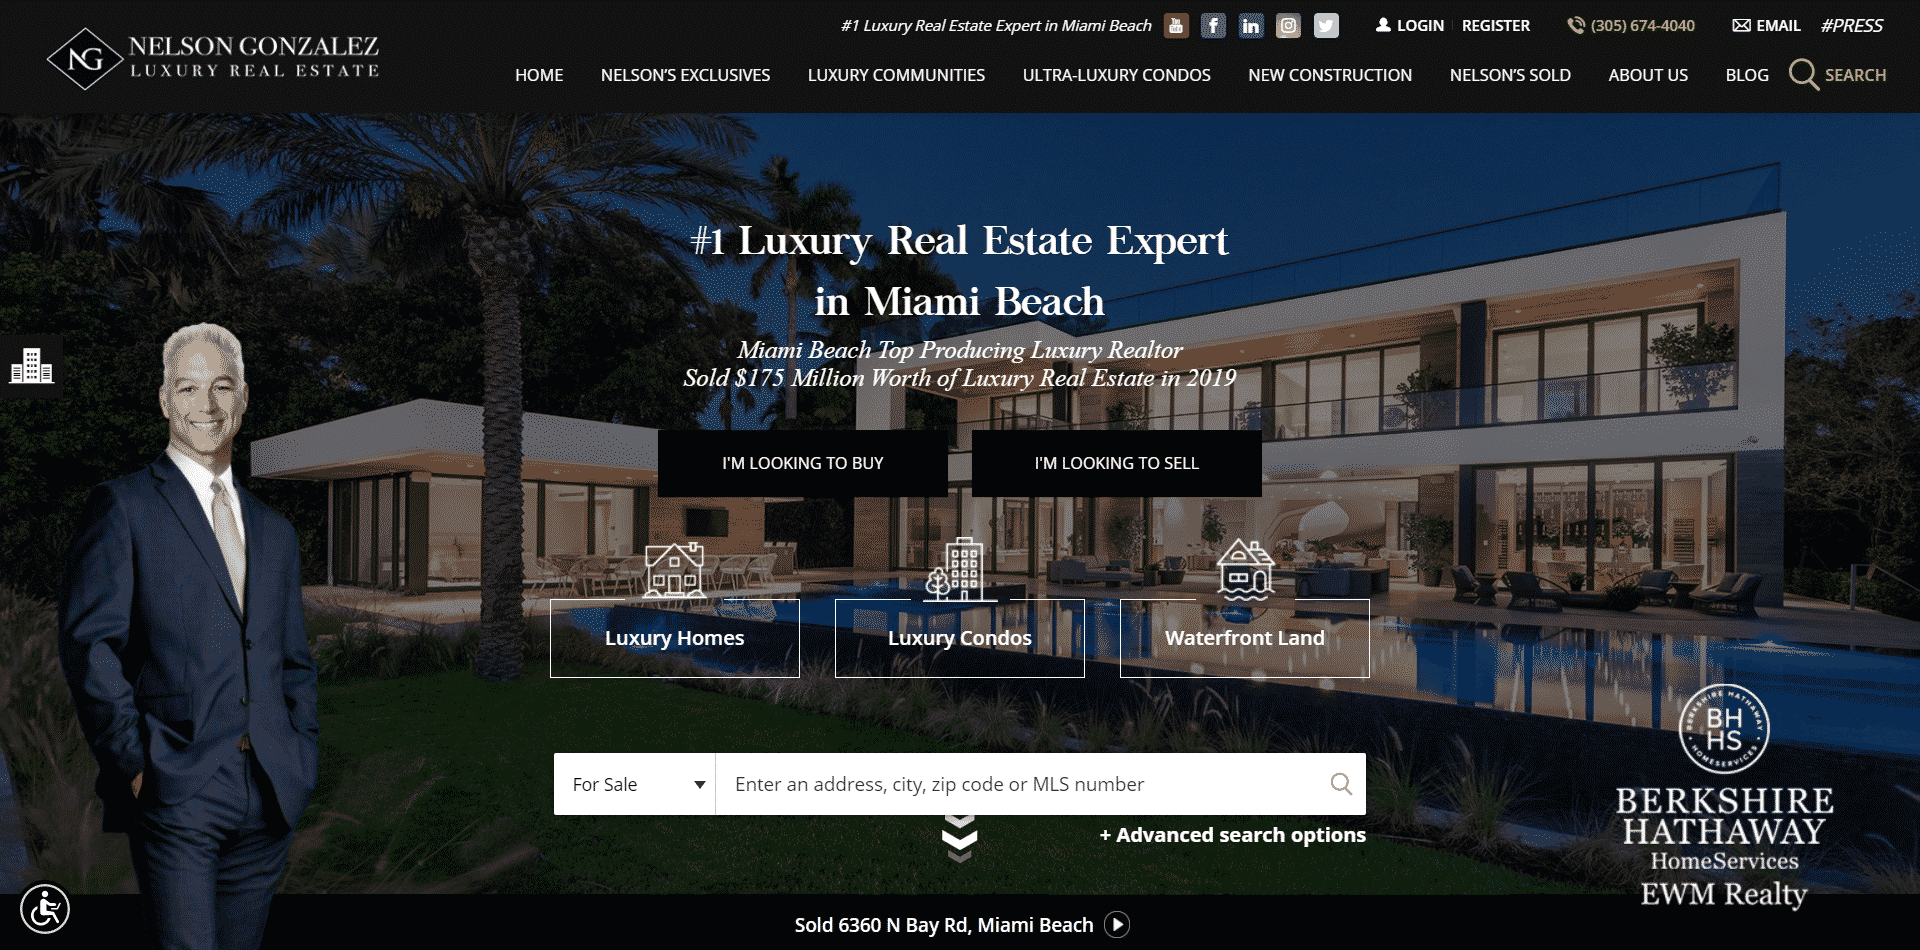 How to Develop a Real Estate Website like Realtor?